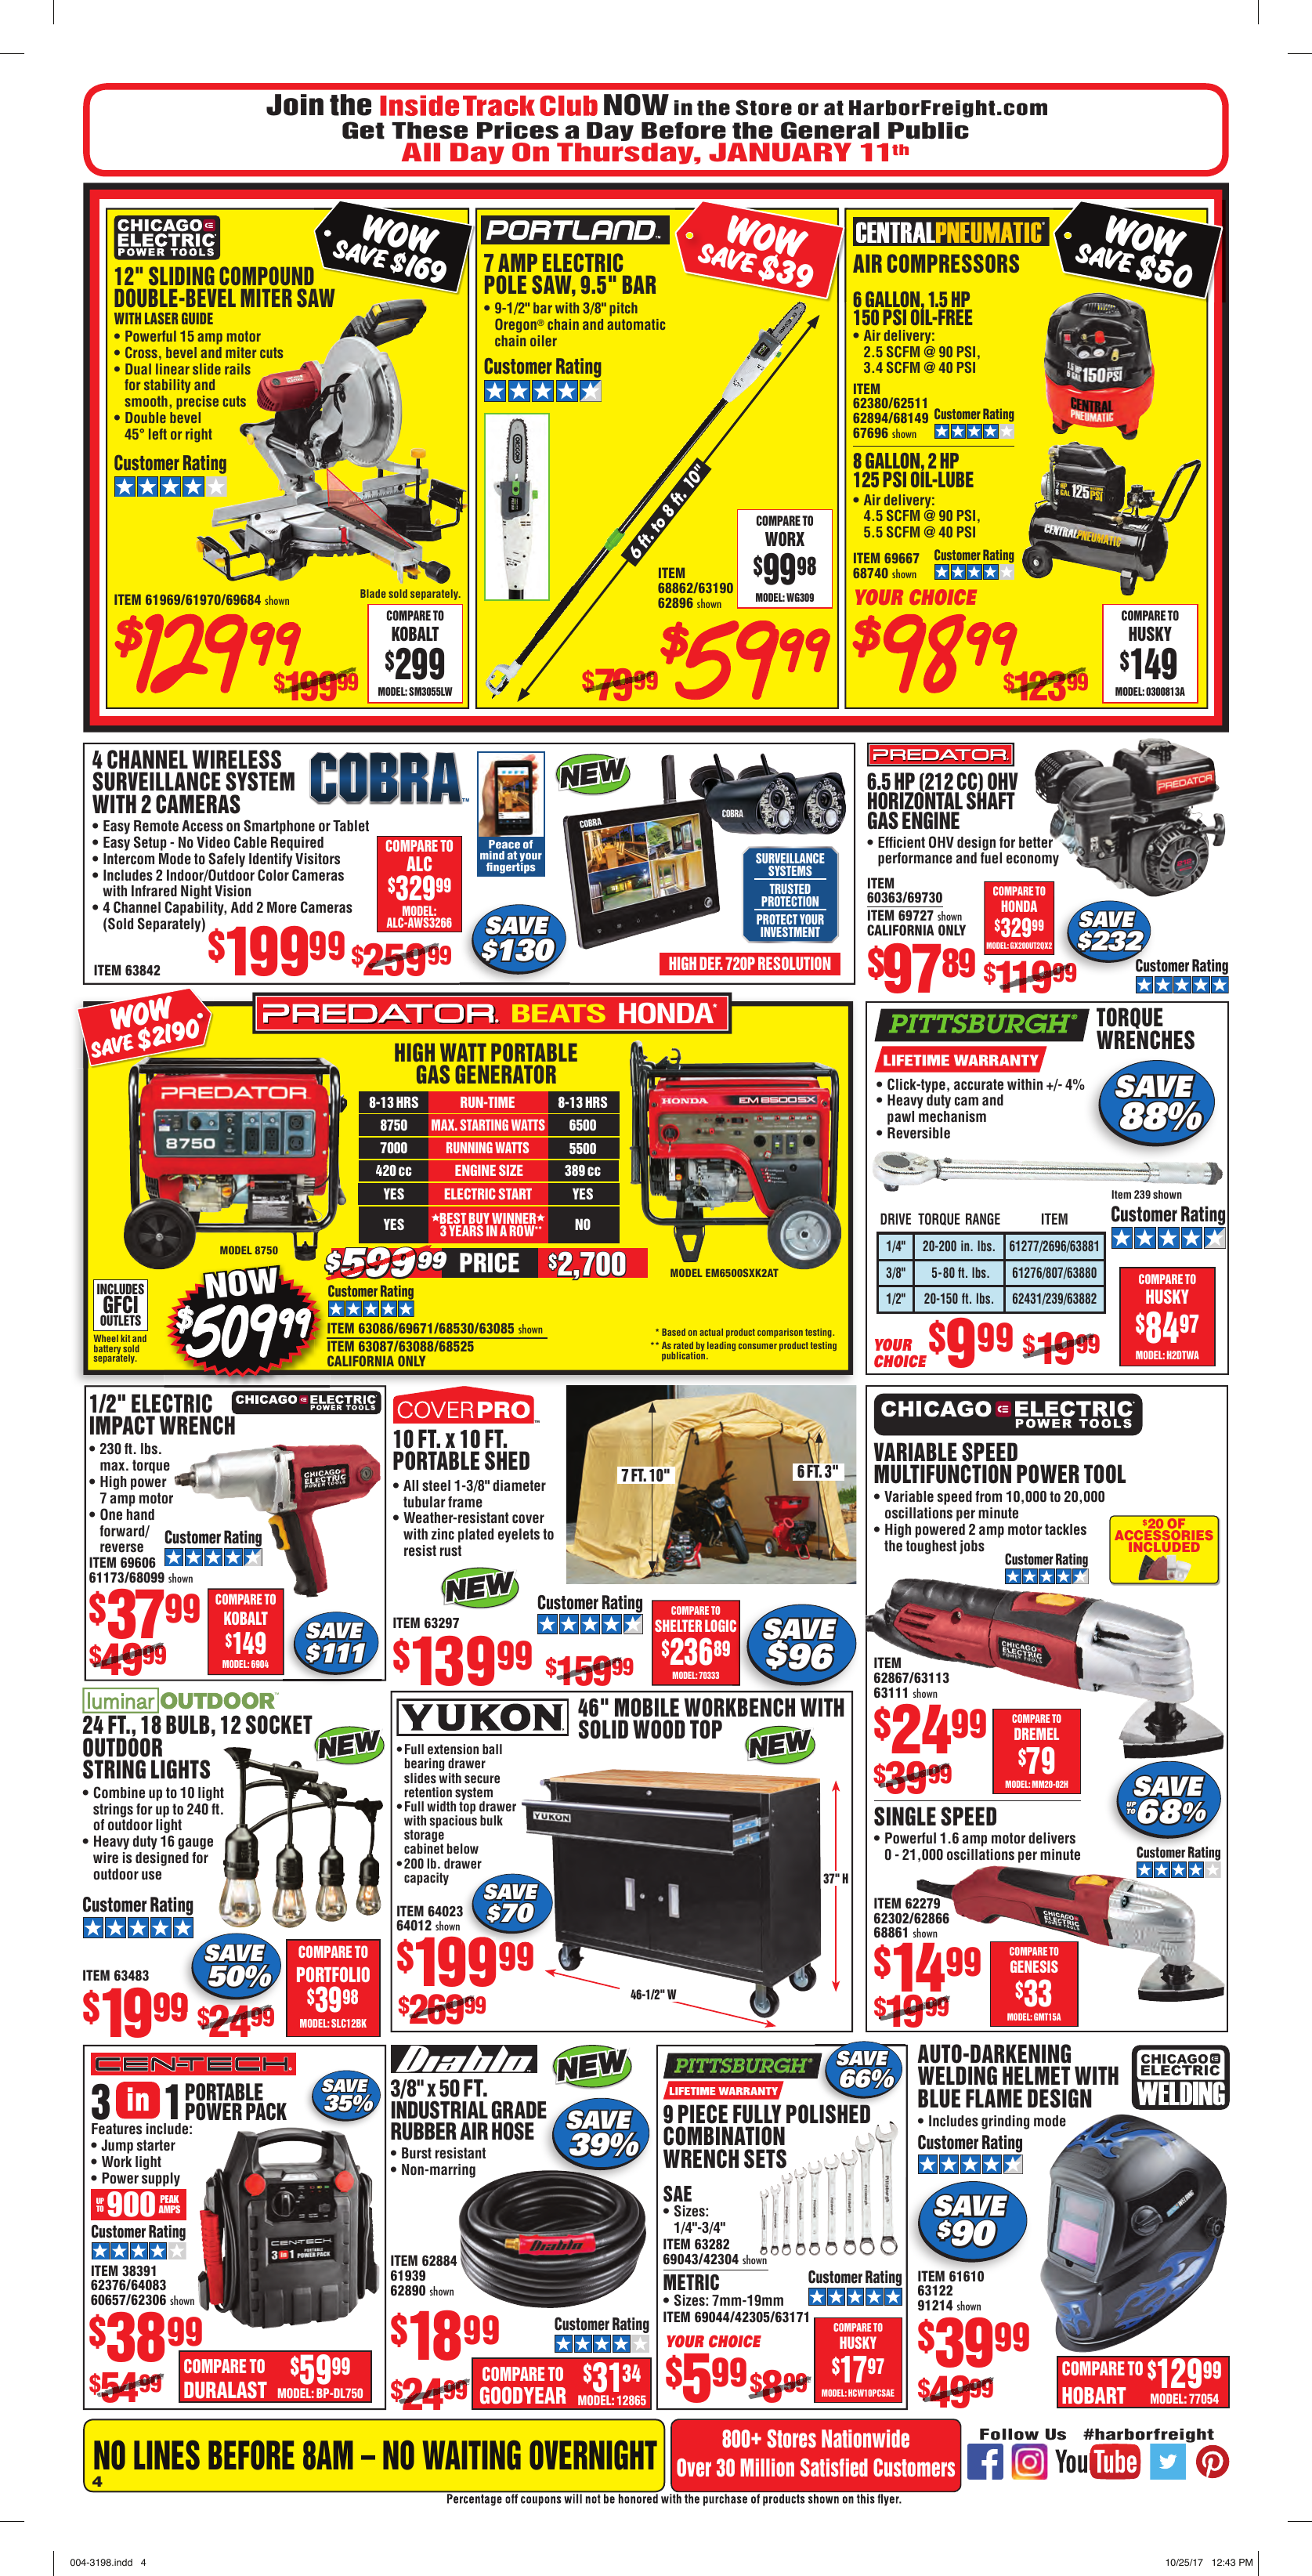 Page 4 of 4 - 001-3198 Jan-Blowout-Sale